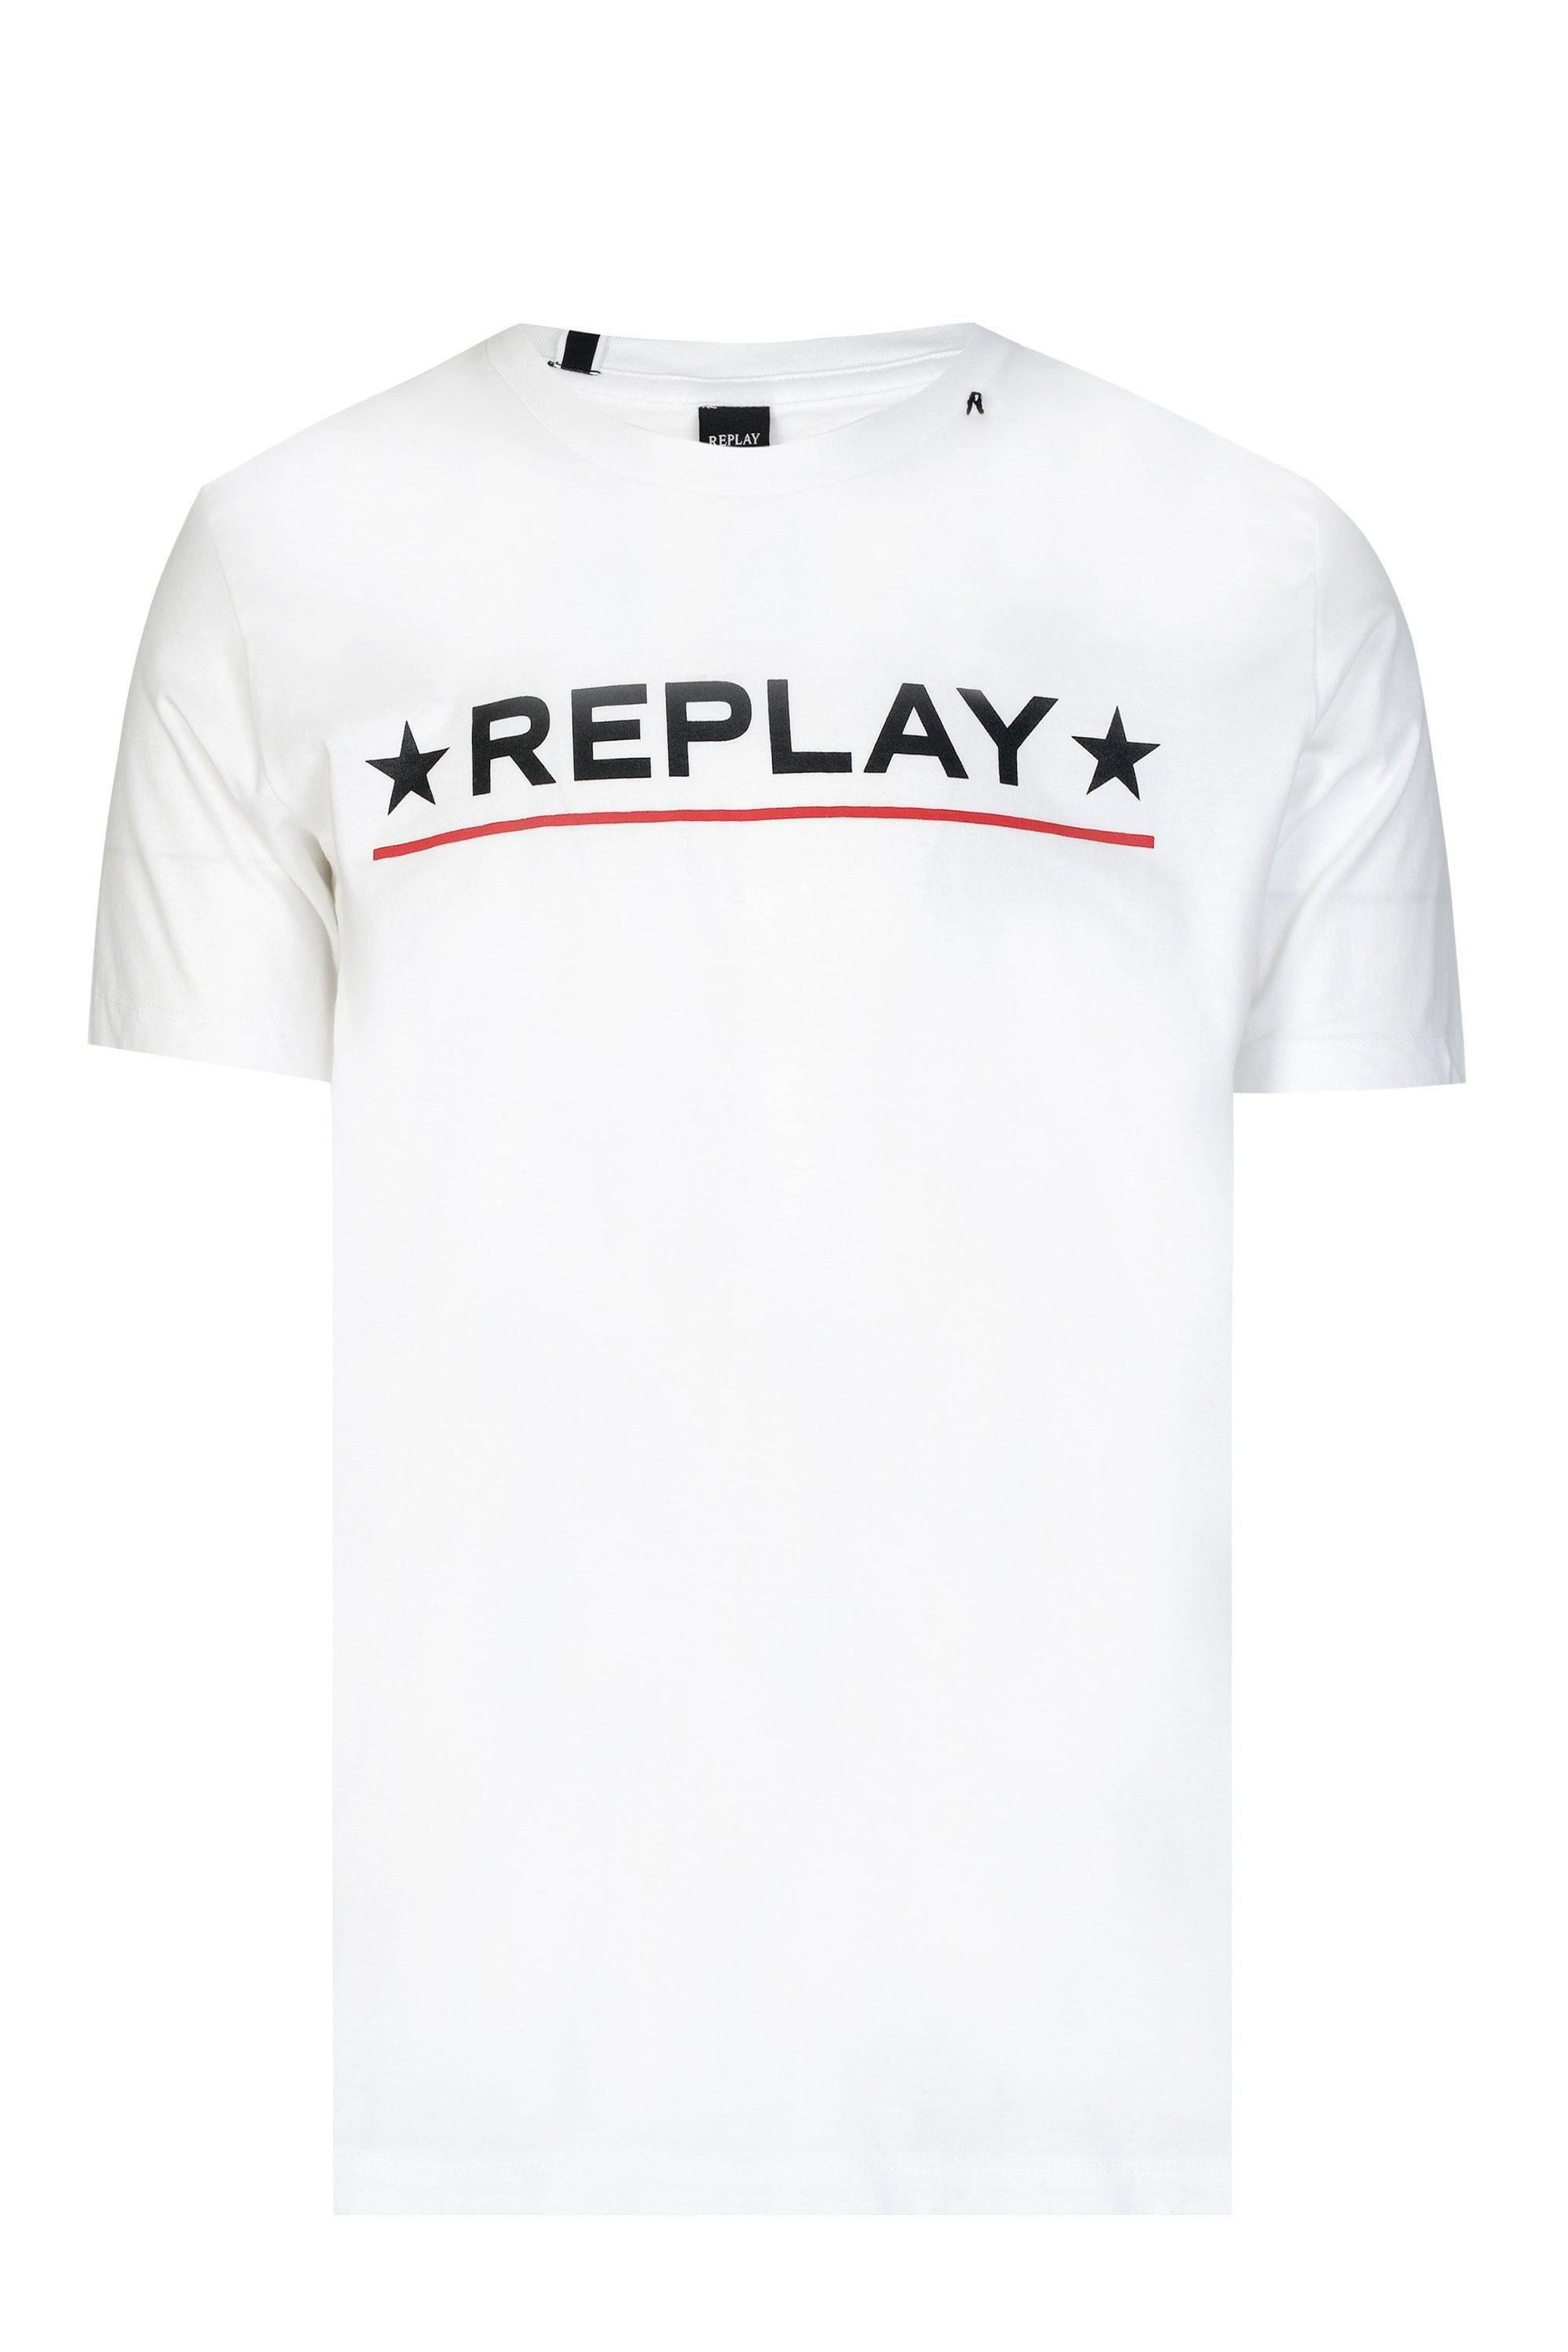 T and Star Logo - Replay Star Logo T-shirt in White for Men - Lyst